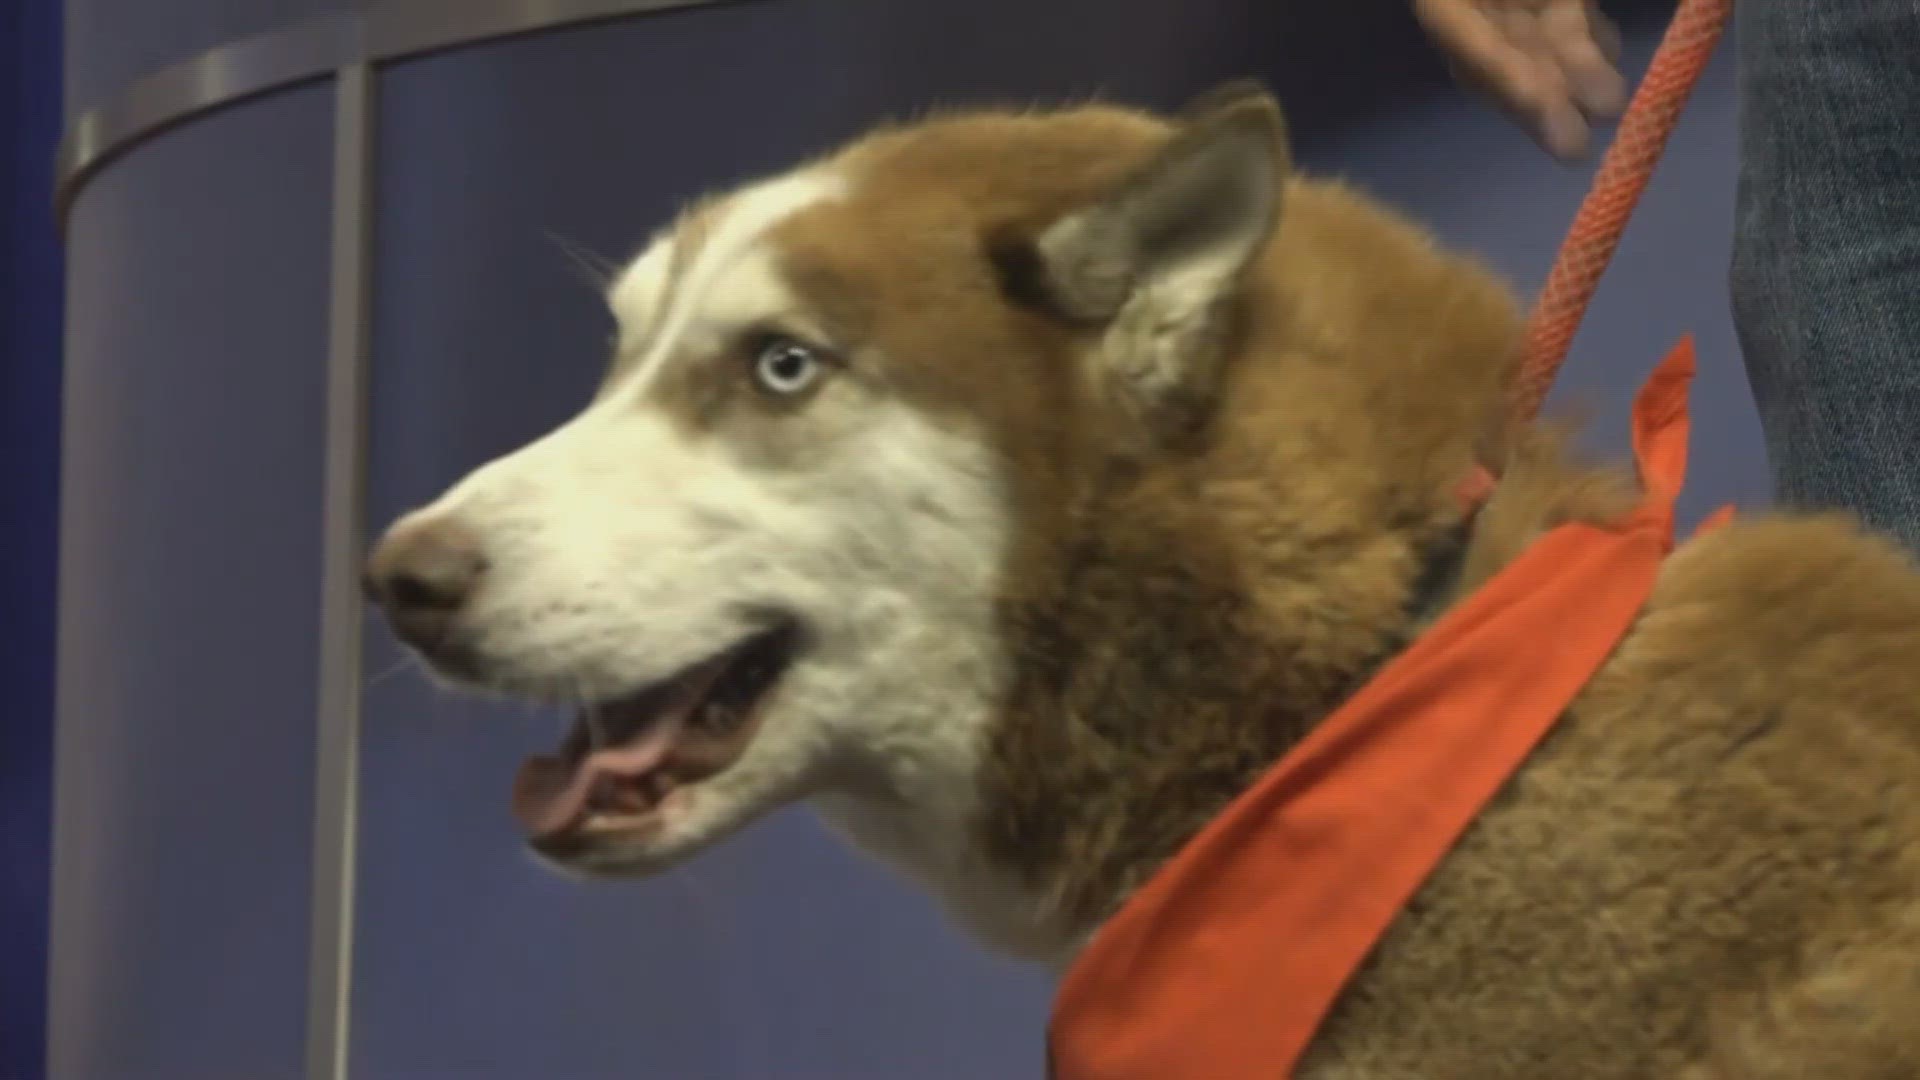 Merlot is a 3-year-old Husky from Killeen looking for his forever home!